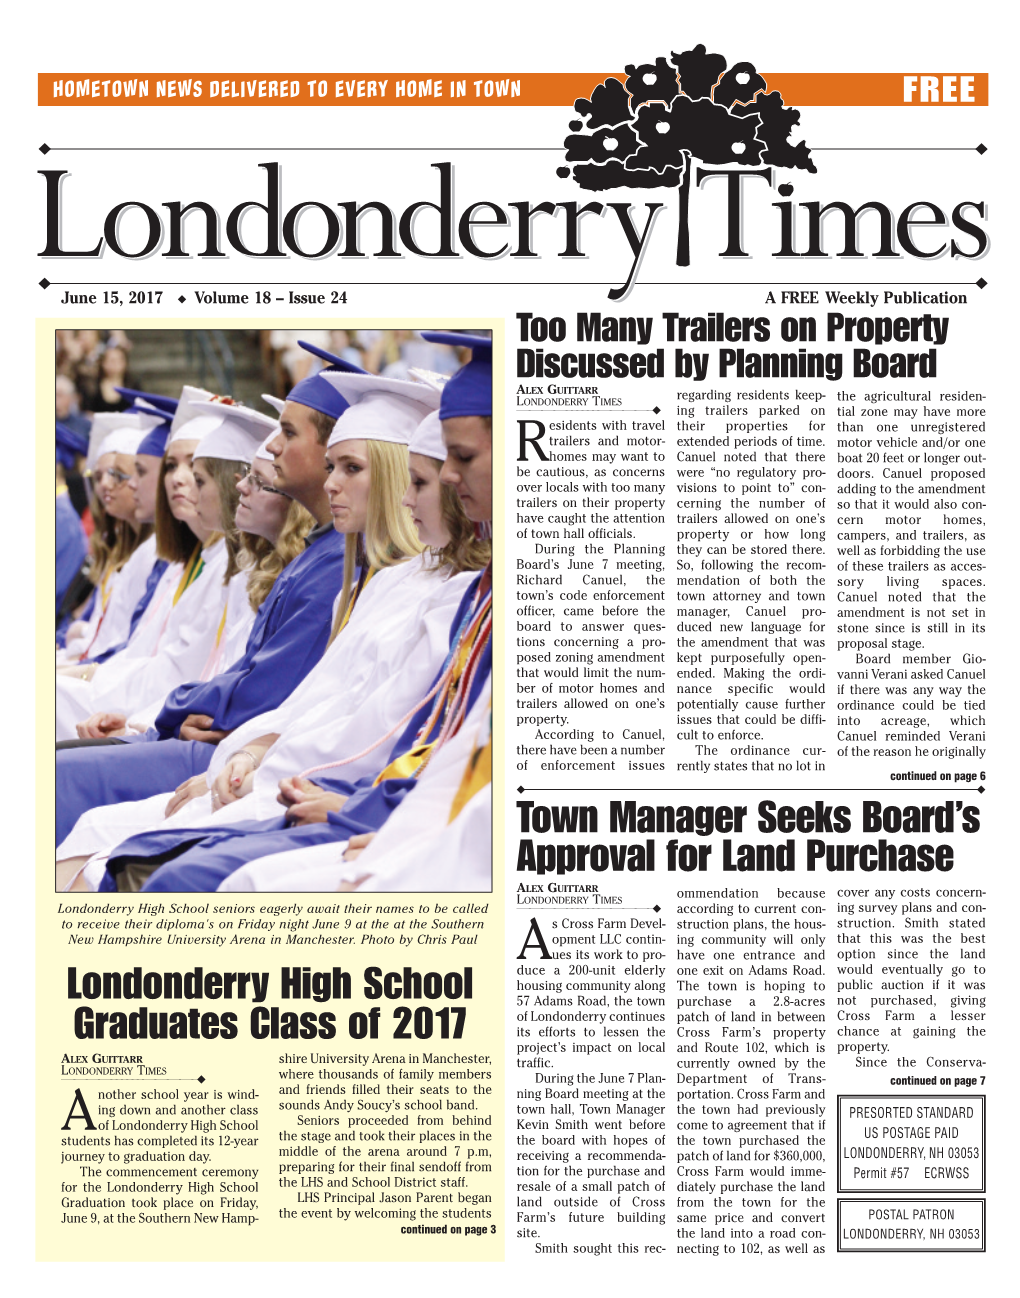 Town Manager Seeks Board's Approval for Land Purchase Londonderry High School Graduates Class of 2017